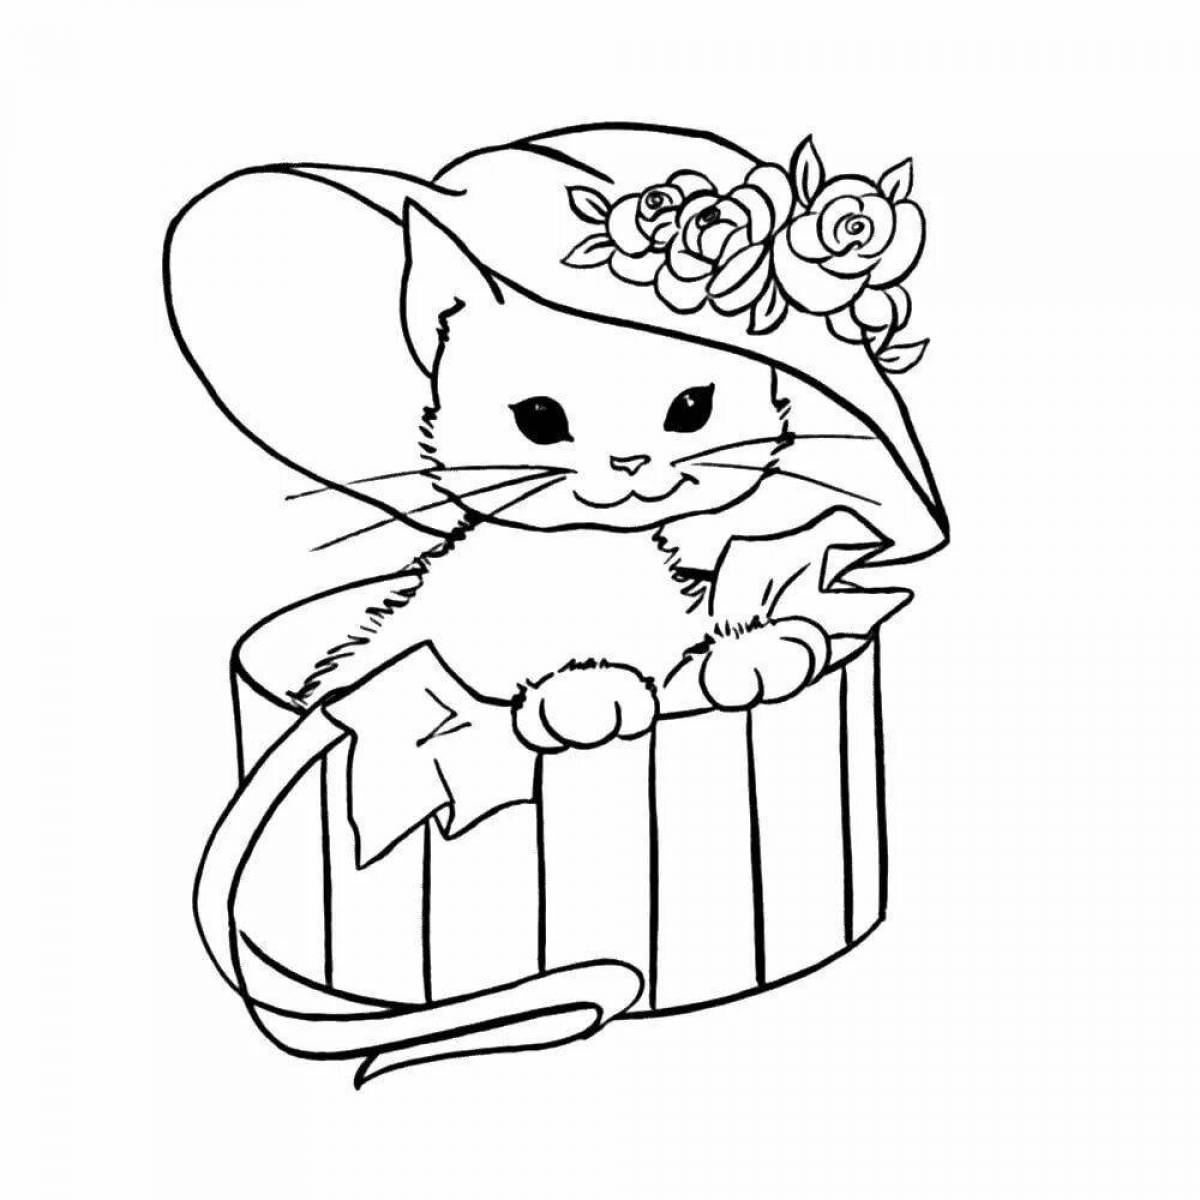 Coloring page adorable year of the cat